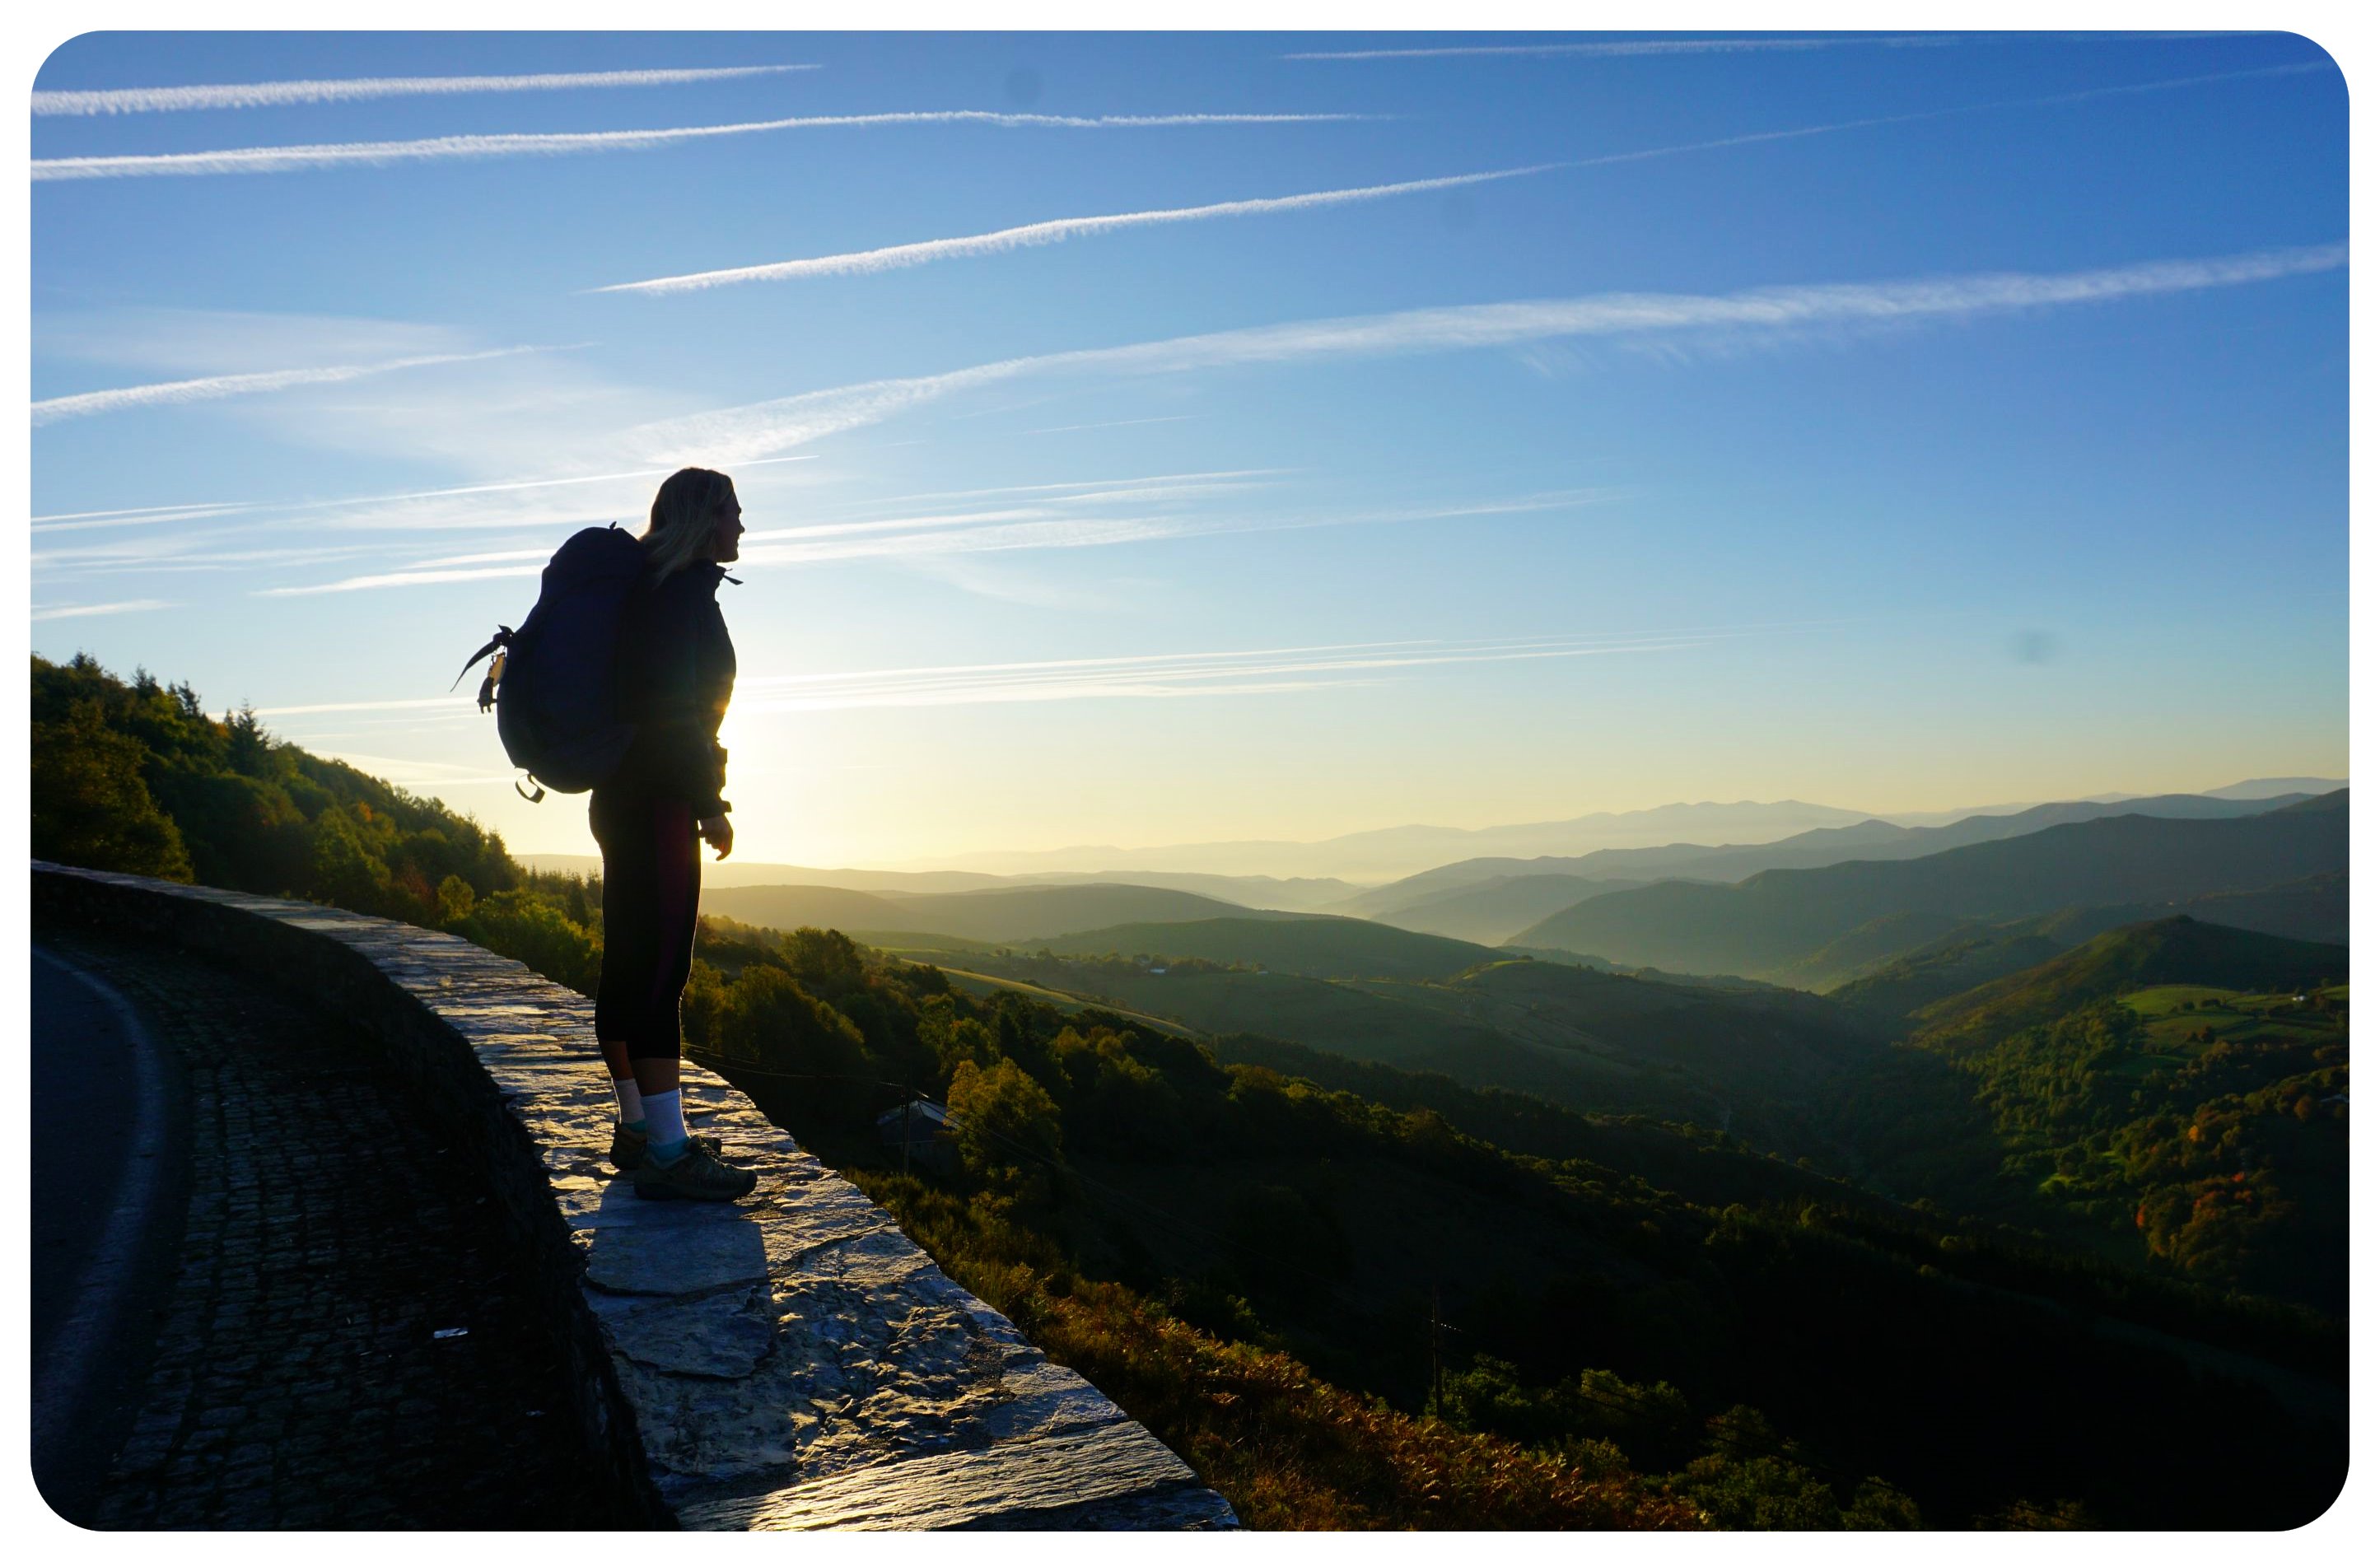 Walking The Camino De Santiago: A Packing List for a 500-Mile Hike